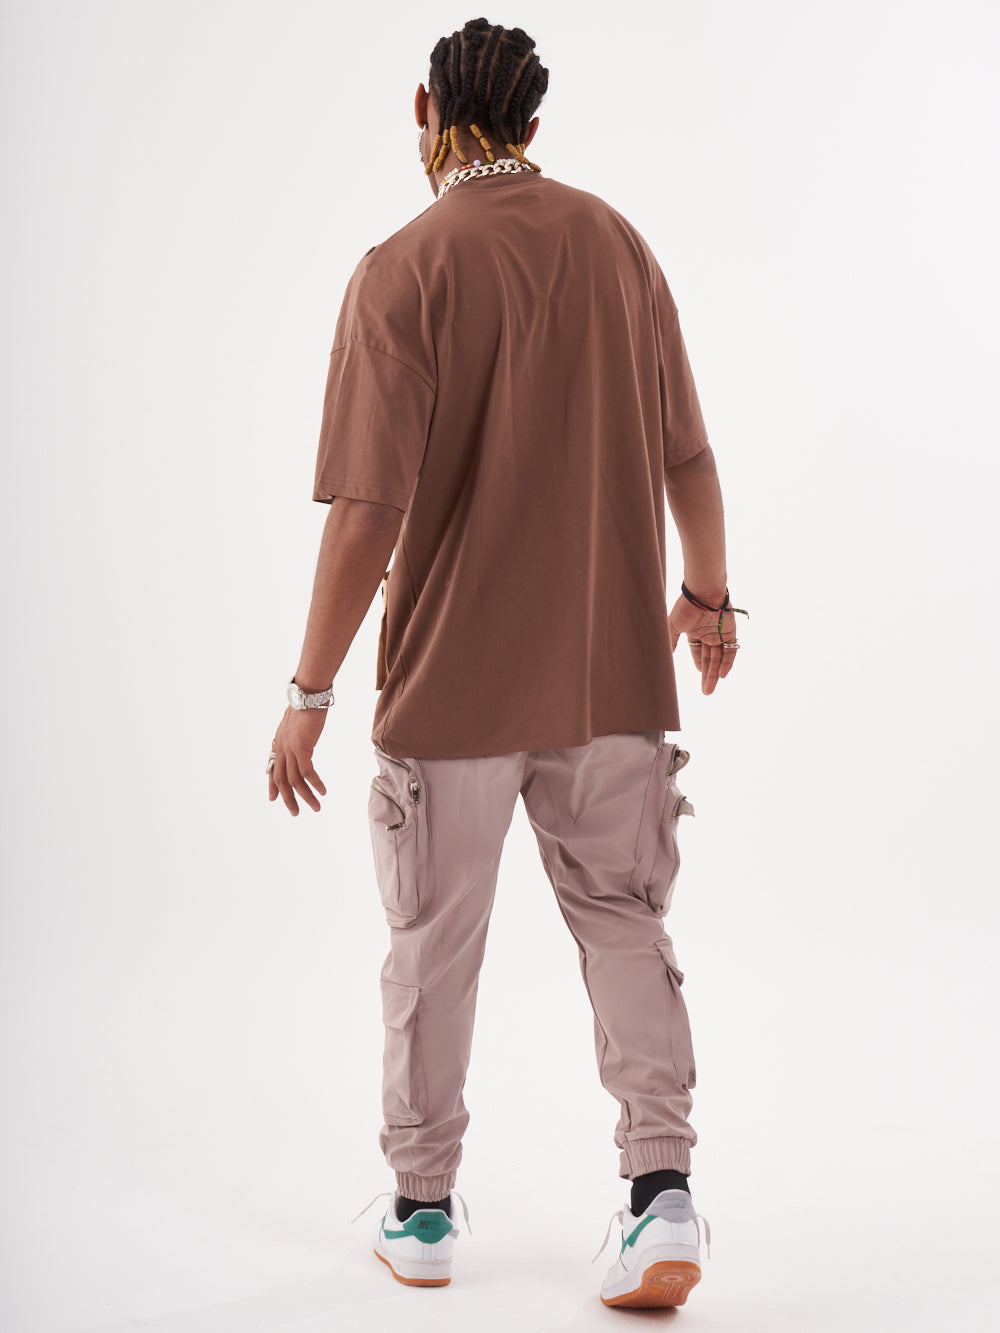 The back of a man wearing a BEATNIK T-SHIRT and cargo pants.